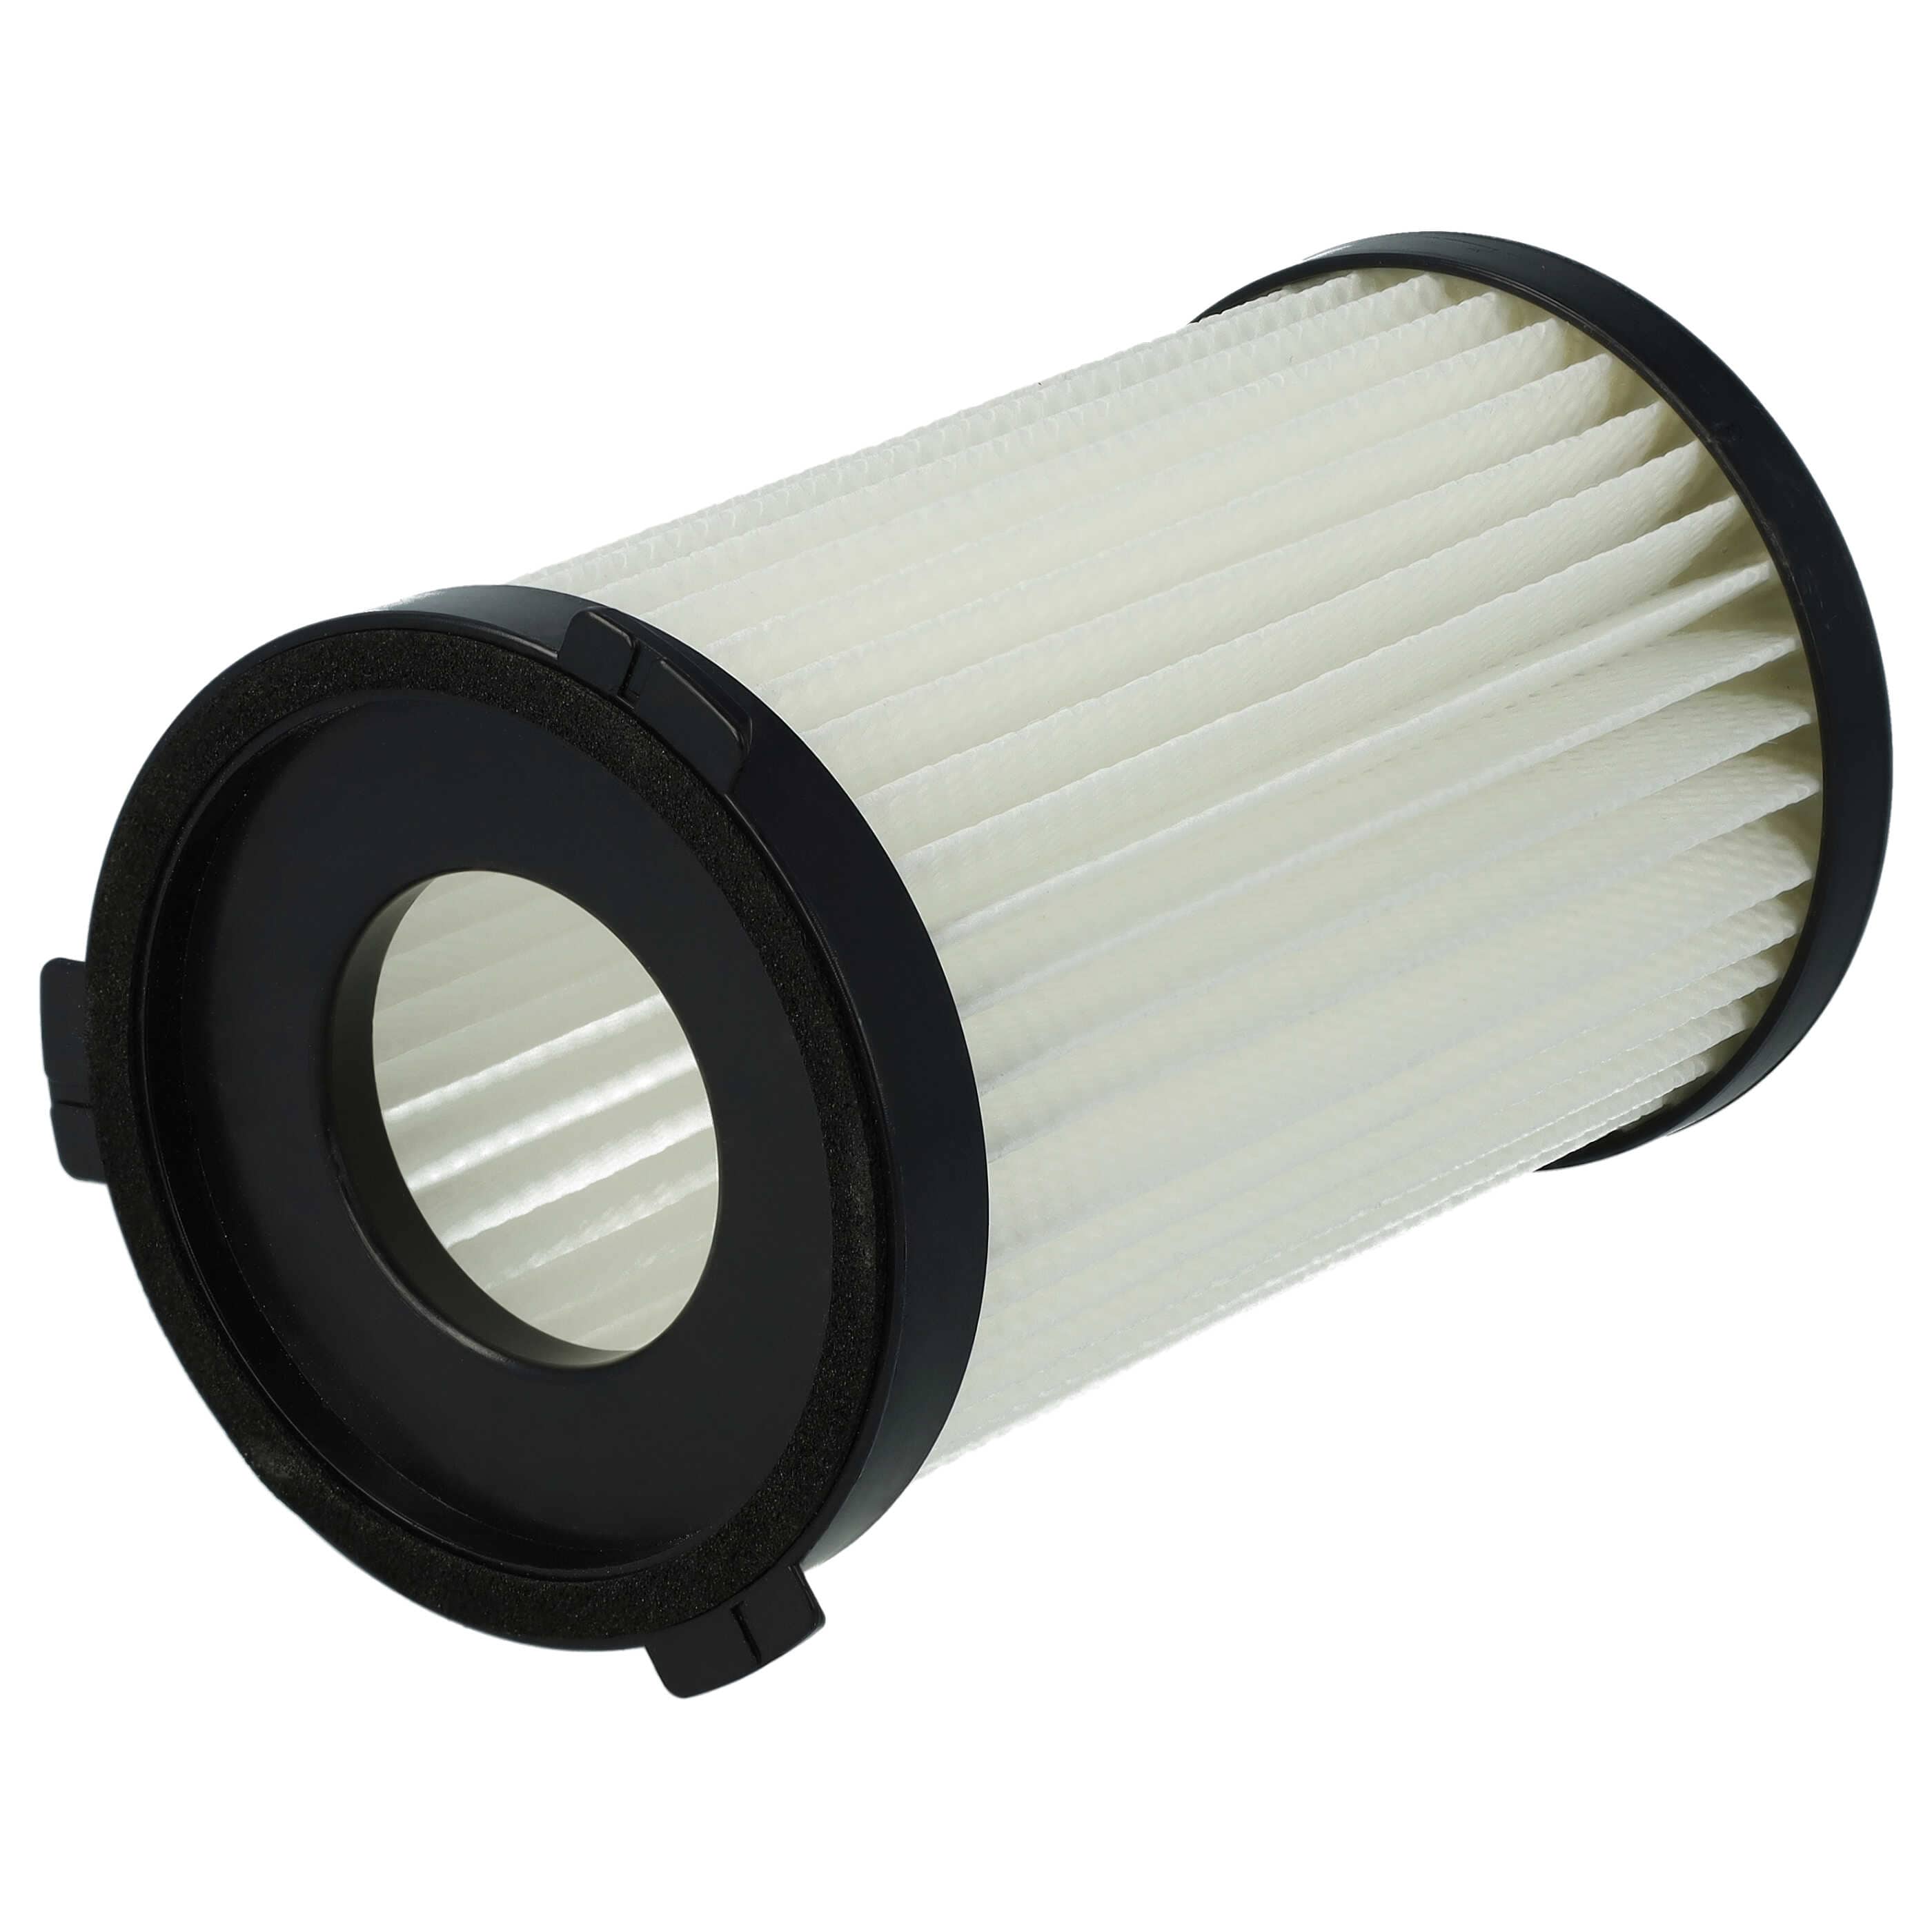 3x HEPA filter suitable for BS 1948 CB BomannVacuum Cleaner